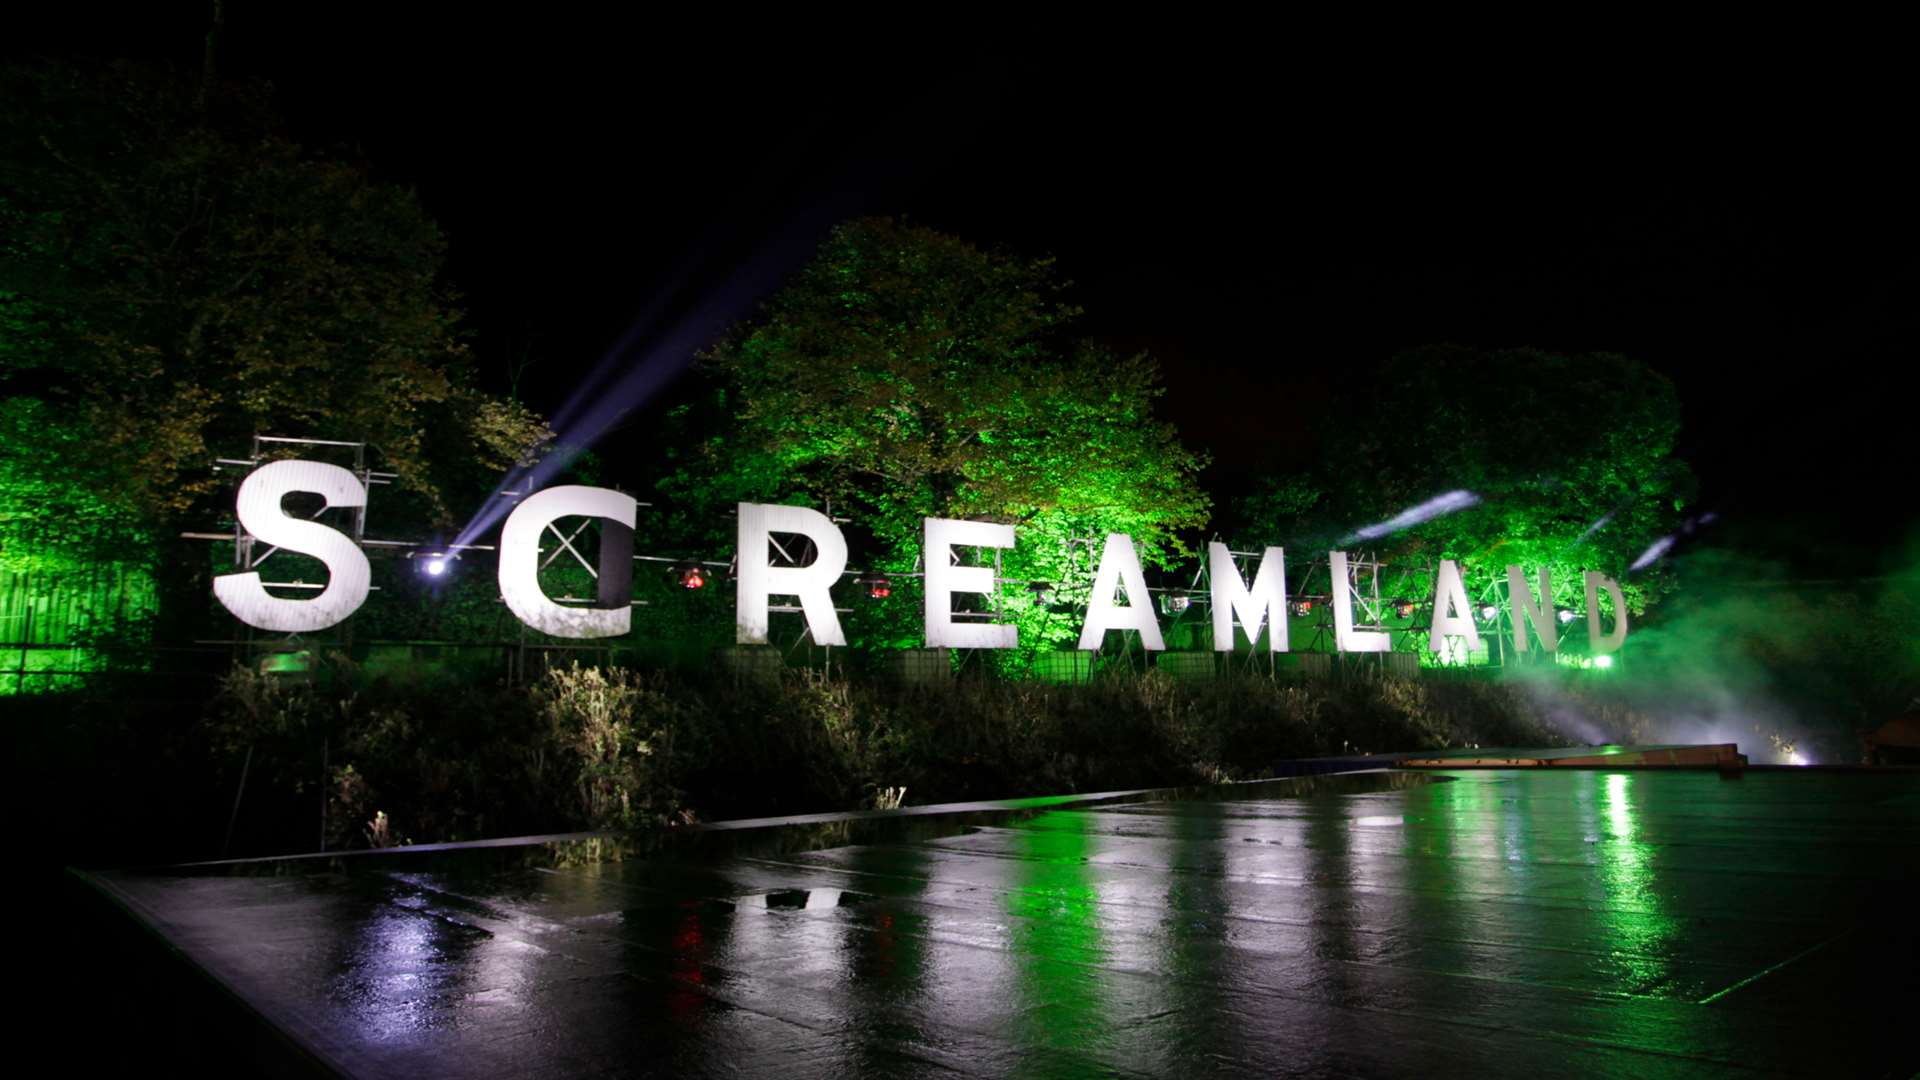 Screamland promises to be bigger and scarier this year